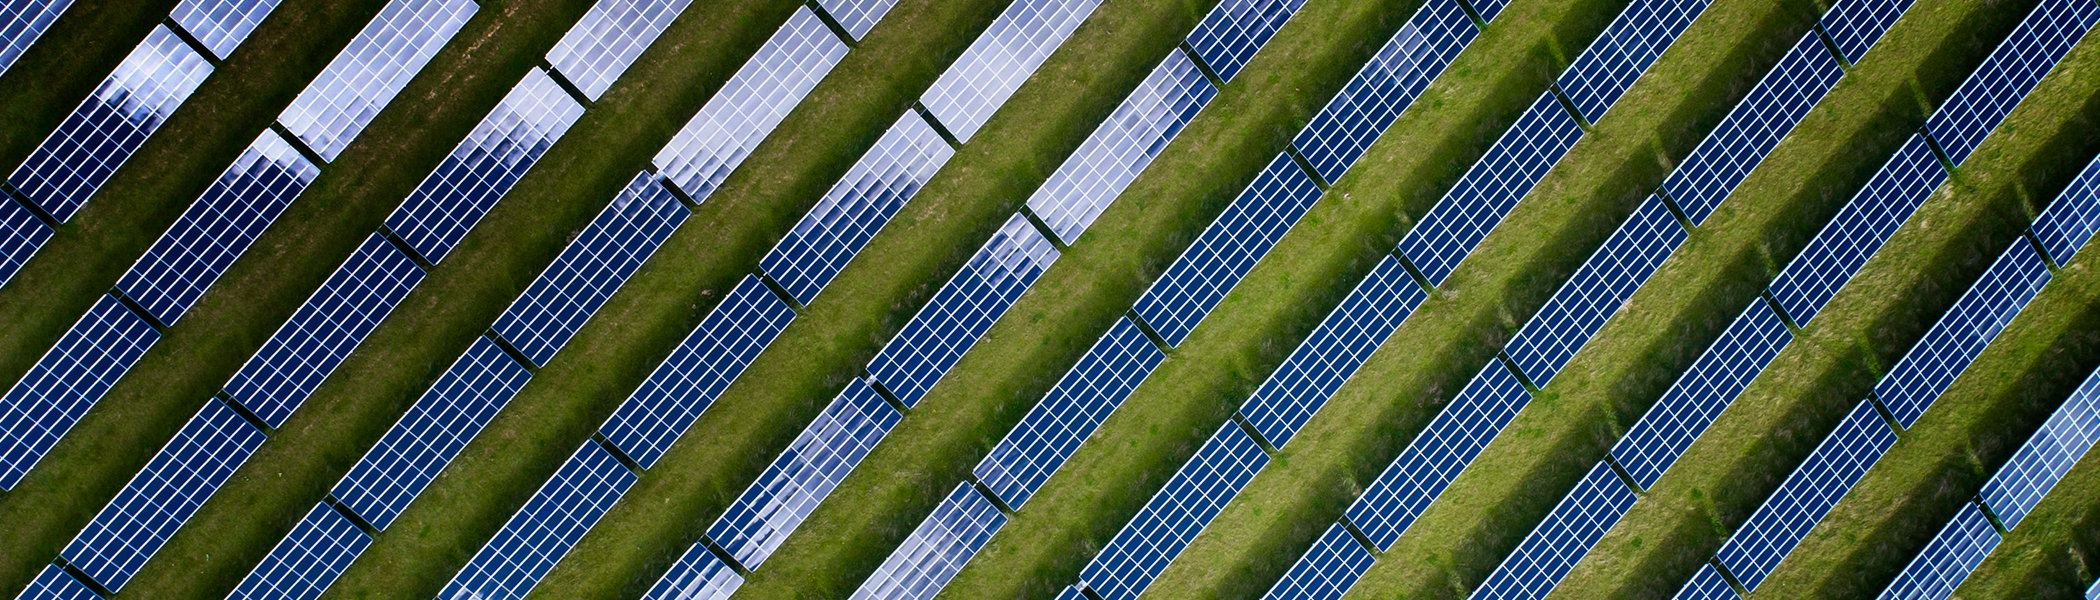 Solar panels viewed from above